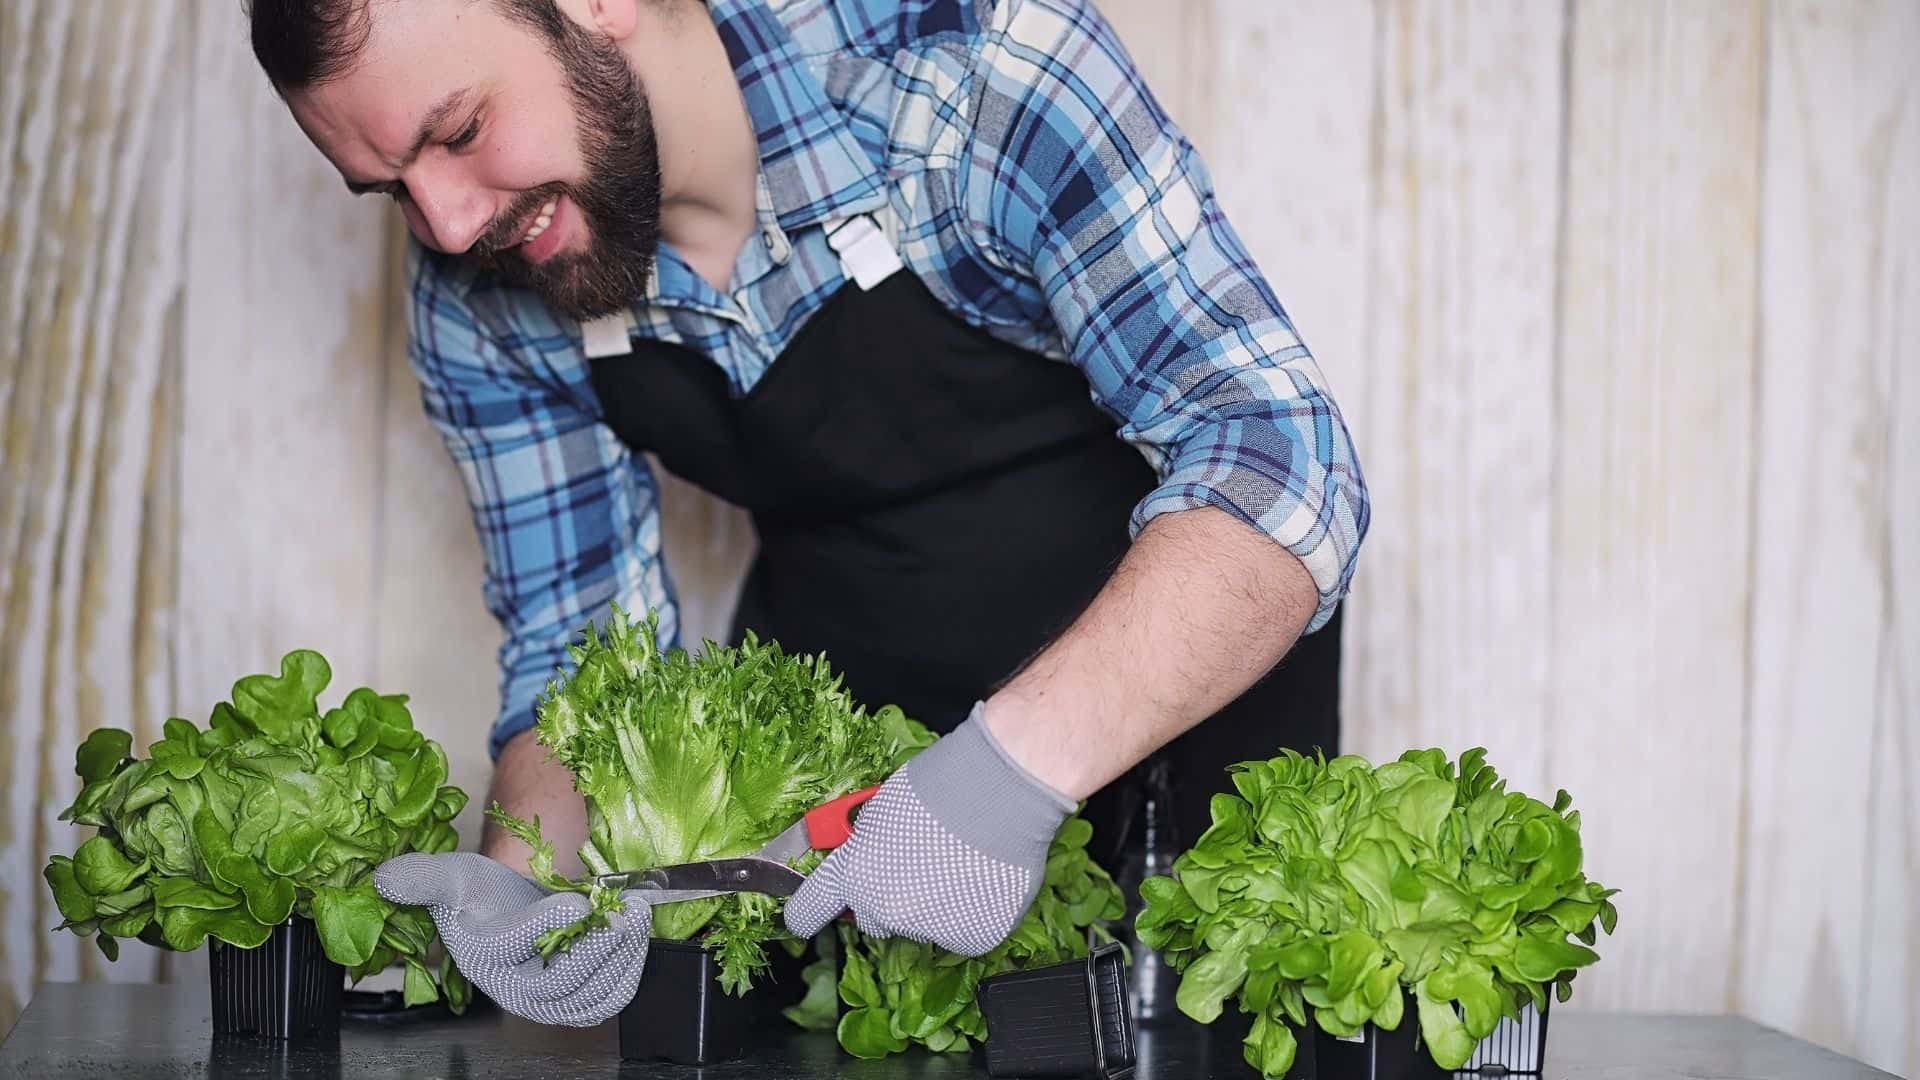 Guide to Grow and Care for Lettuce in Container at Home